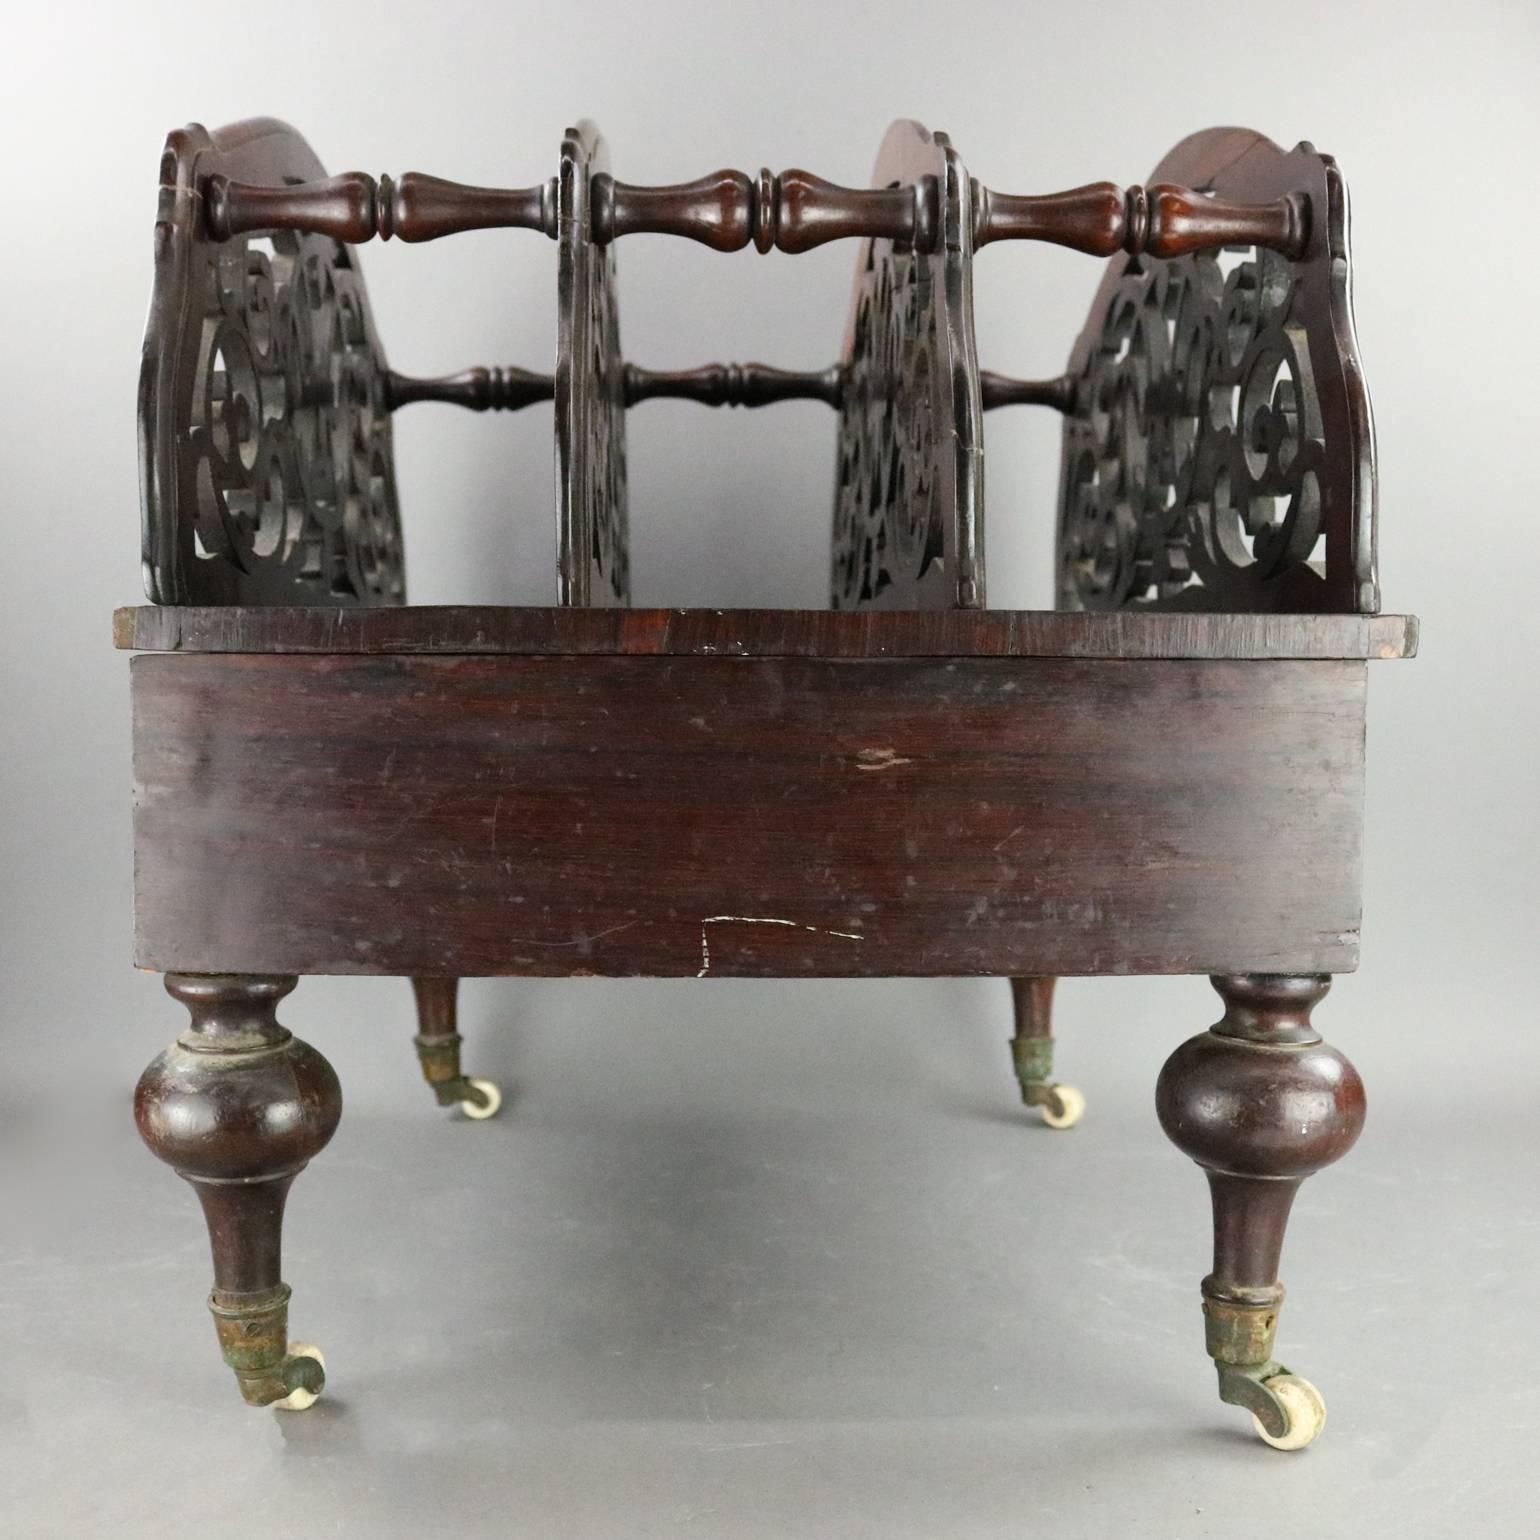 Antique single drawer English stand features scroll and foliate cut-out design with turned dividers, circa 1870.

Measures: 19